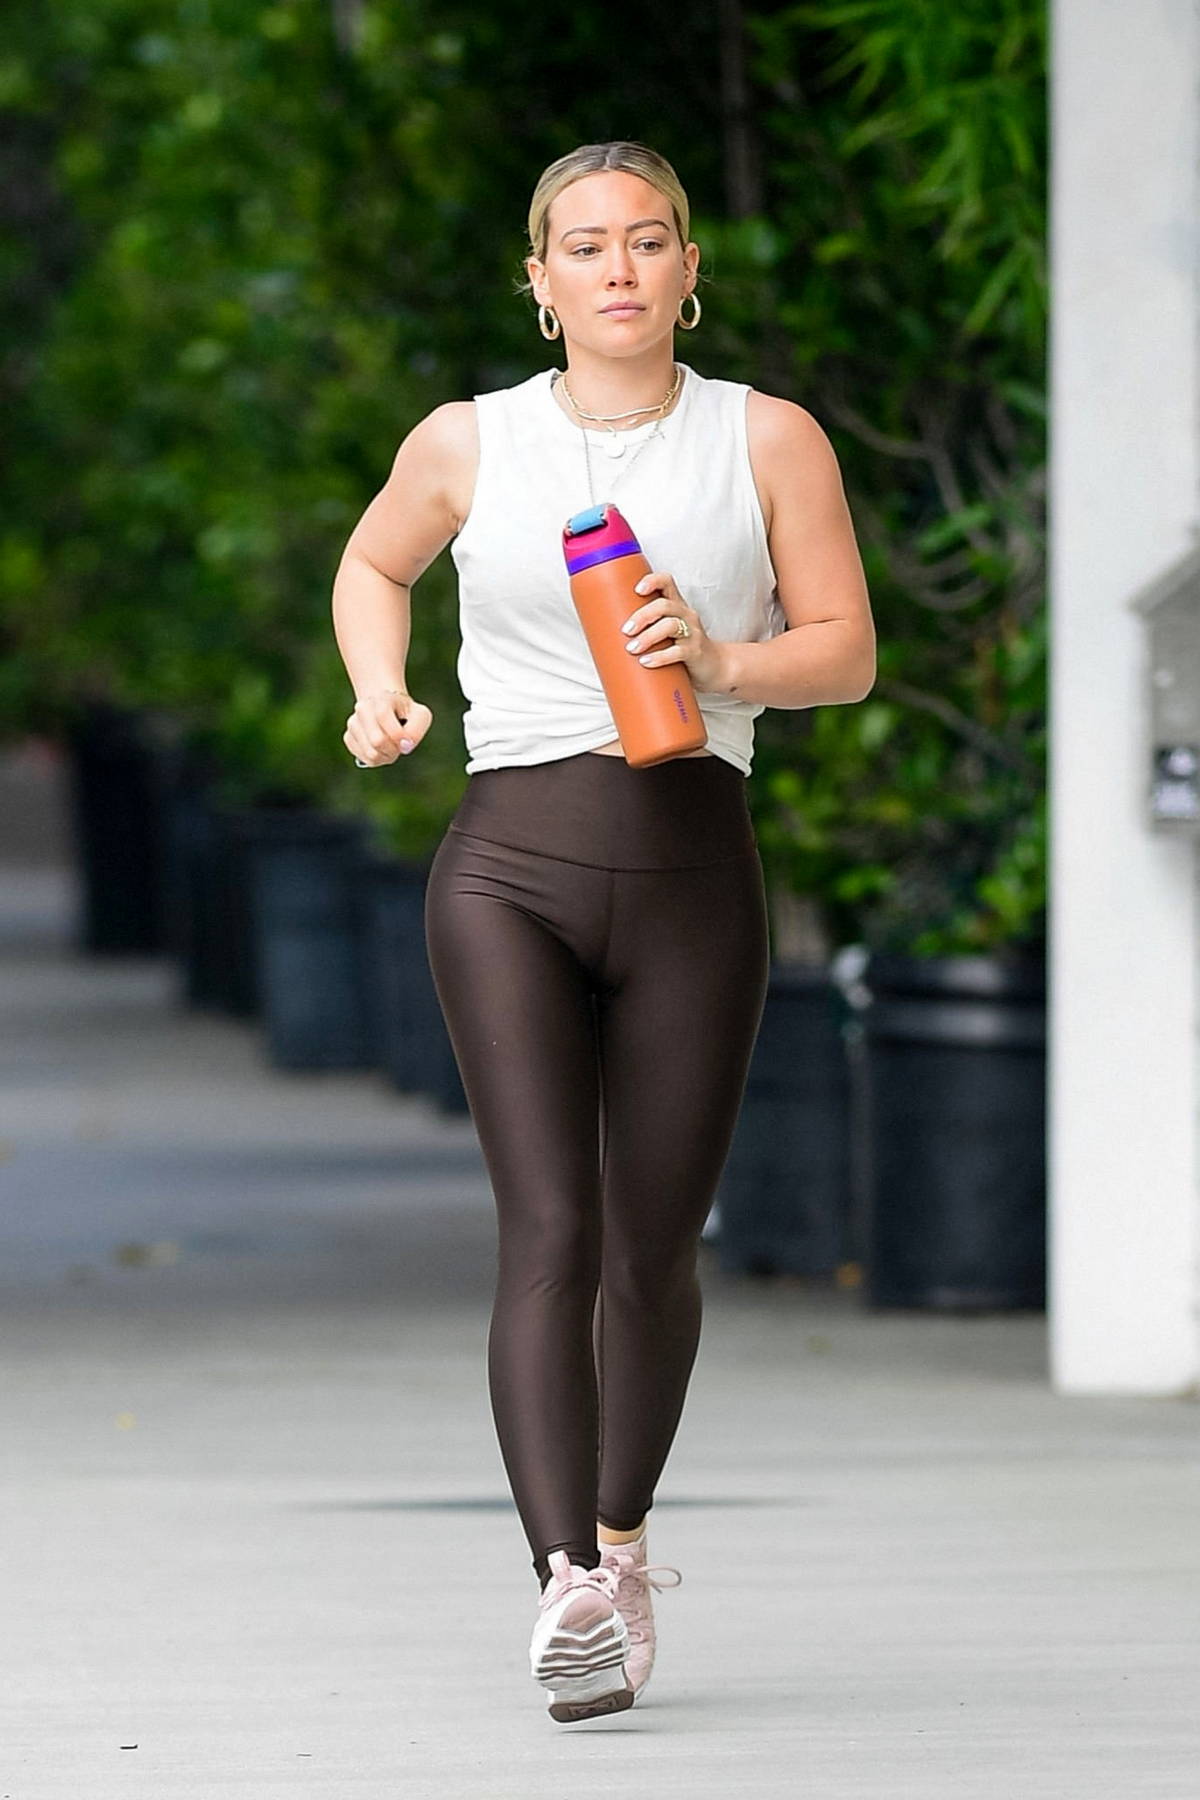 Hilary Duff looks fit in a white tank top and dark brown leggings while out  heading